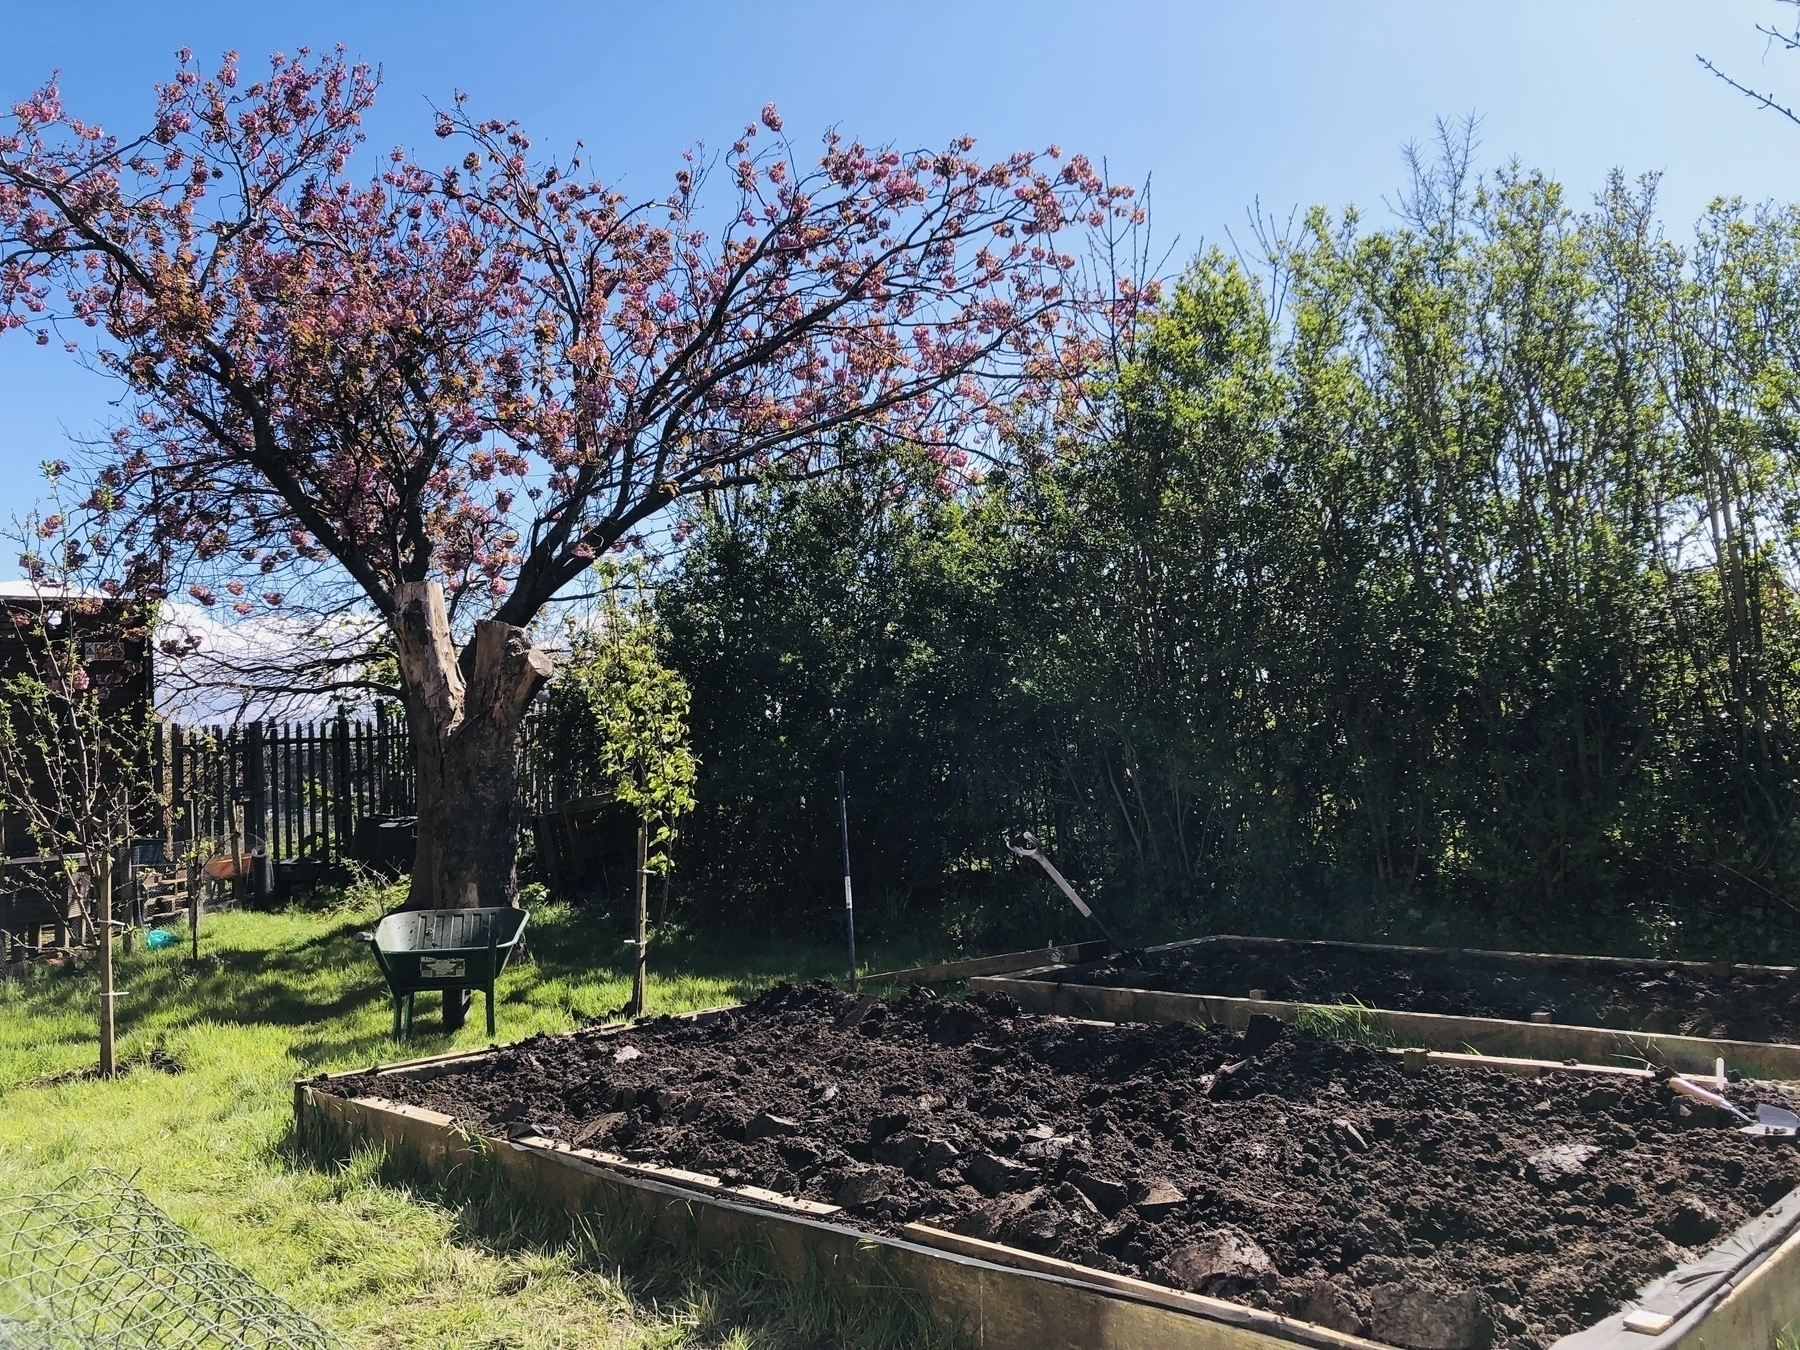 Pink blossom tree in the sun with raised beds and a wheelbarrow in the foreground. Blue sky above. 